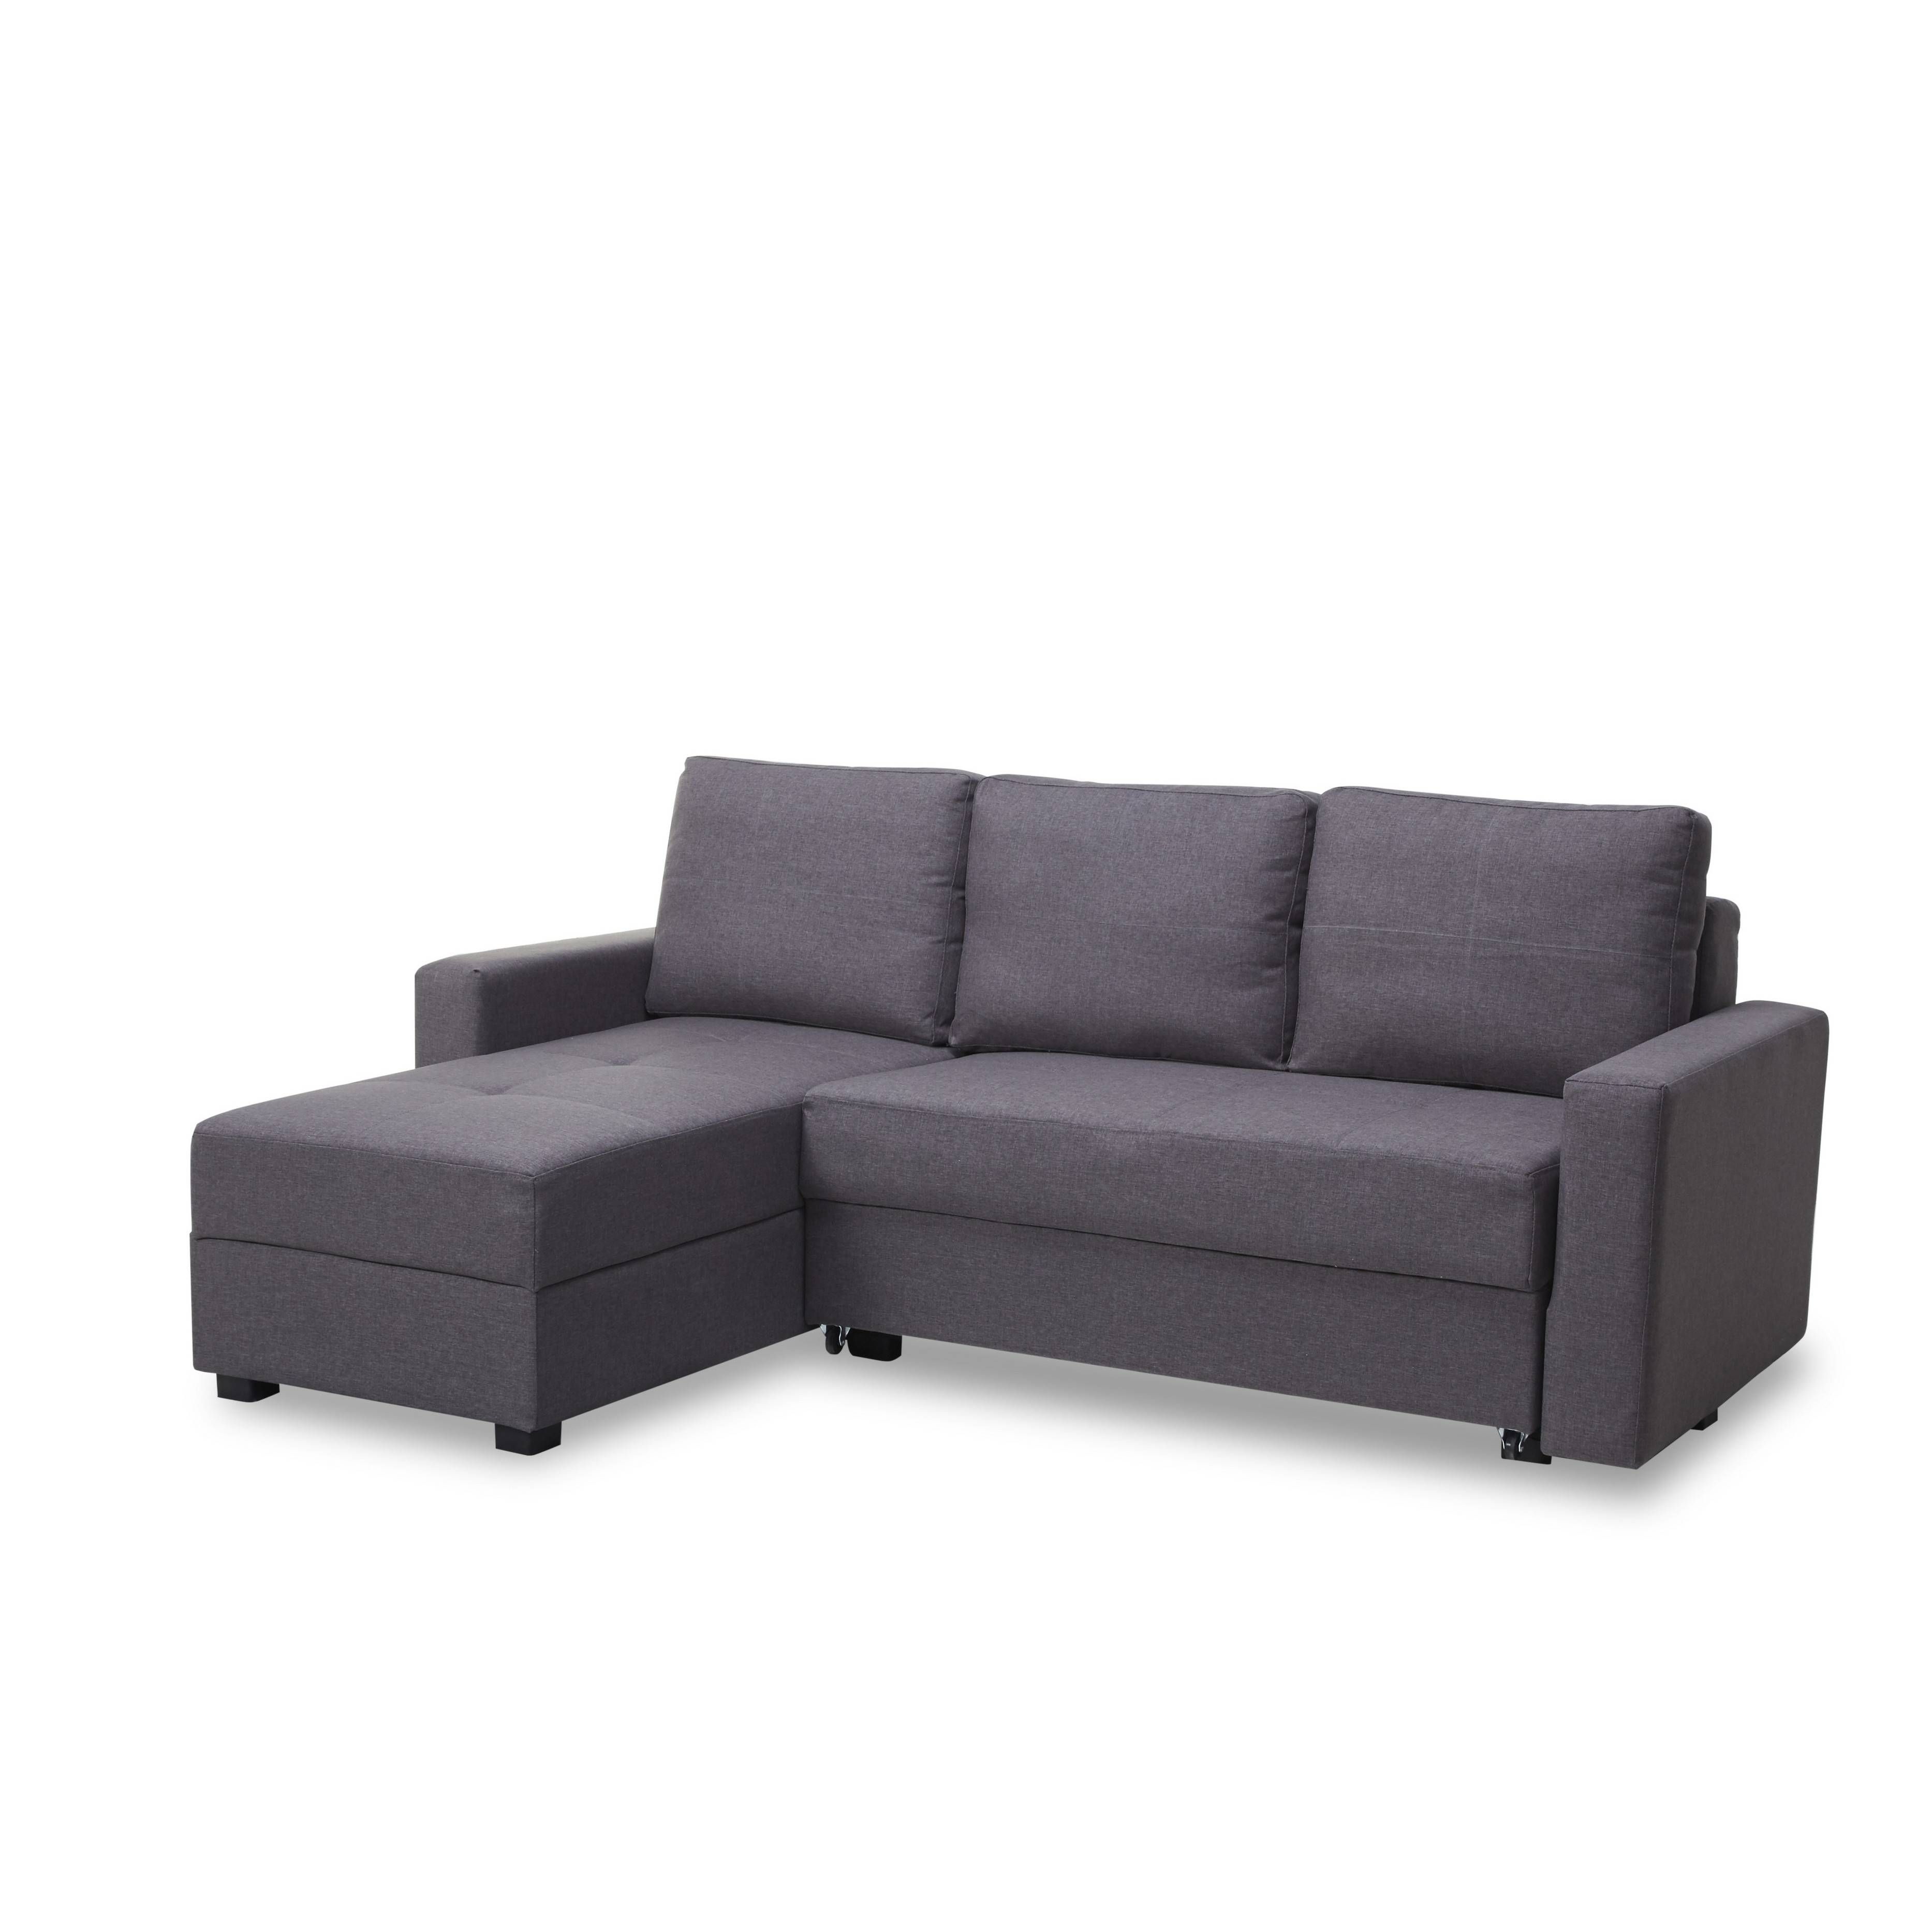 Gianni Sofa Bed With Storage Chaise | Centerfieldbar Regarding Sofa Beds With Storage Chaise (View 1 of 15)